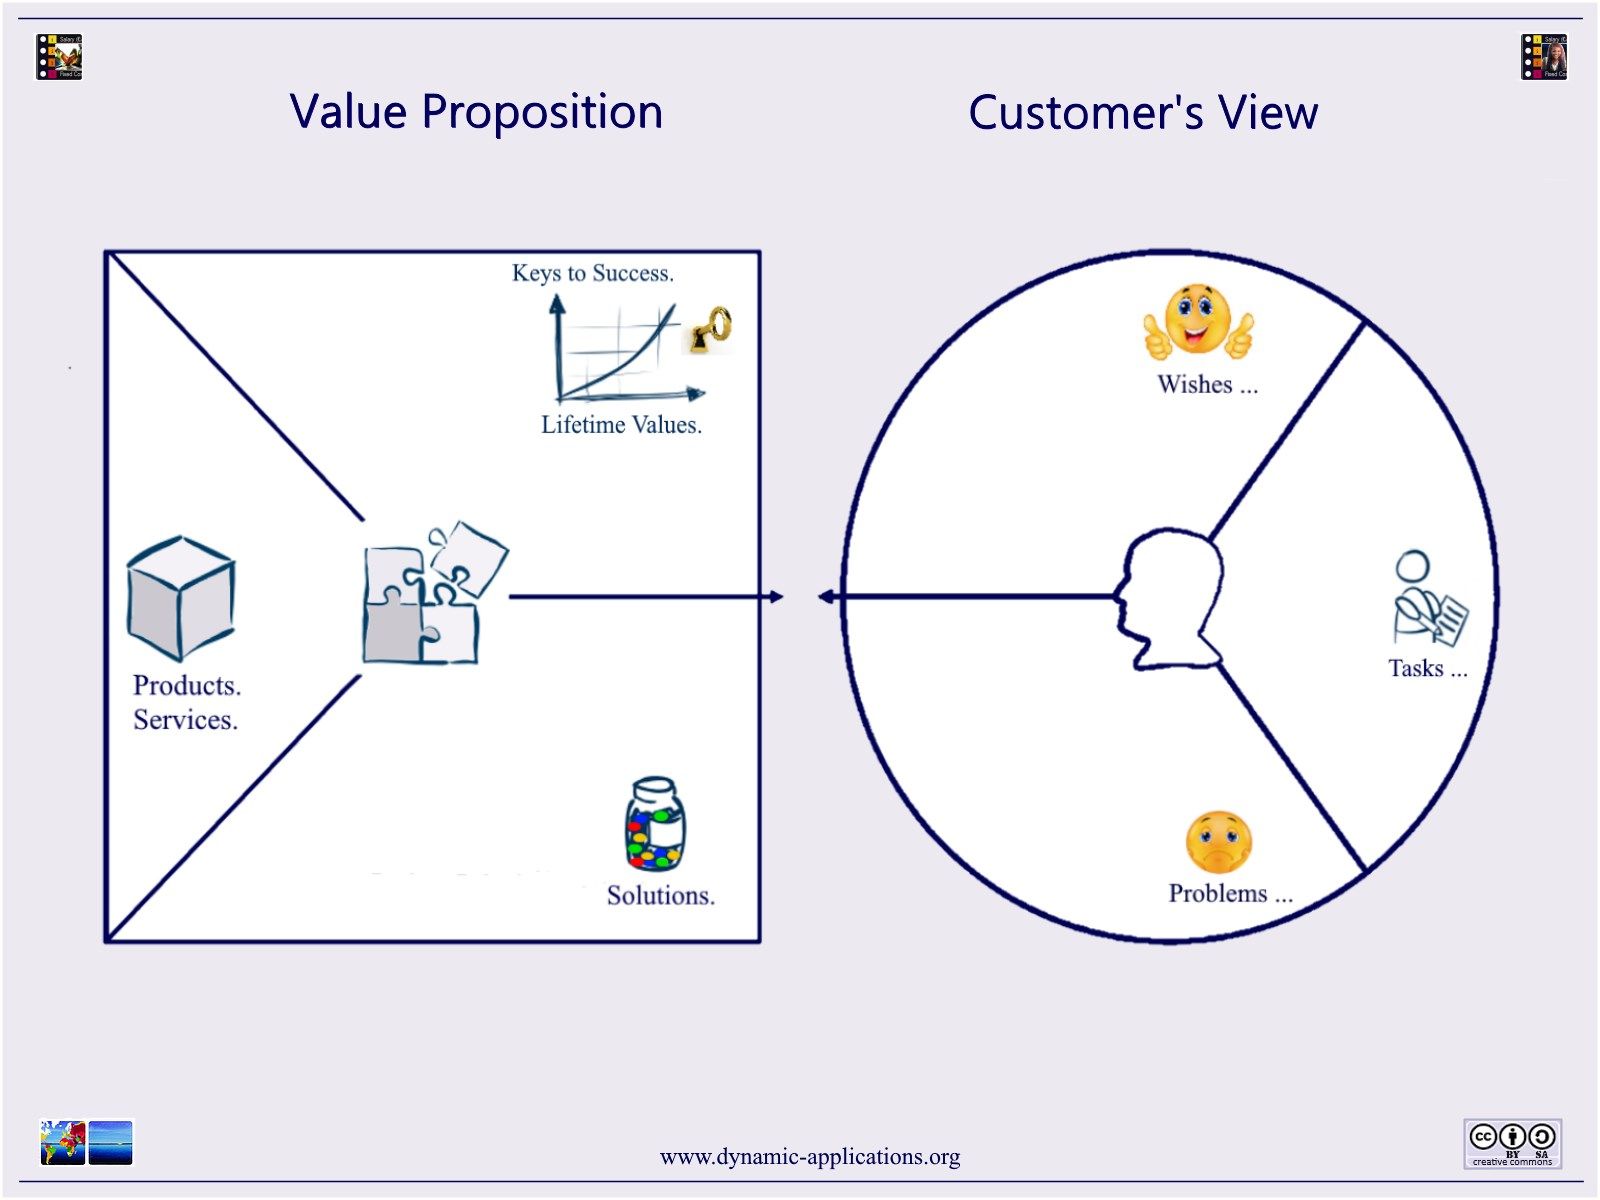 Value Proposition Canvas - determine your offering's value